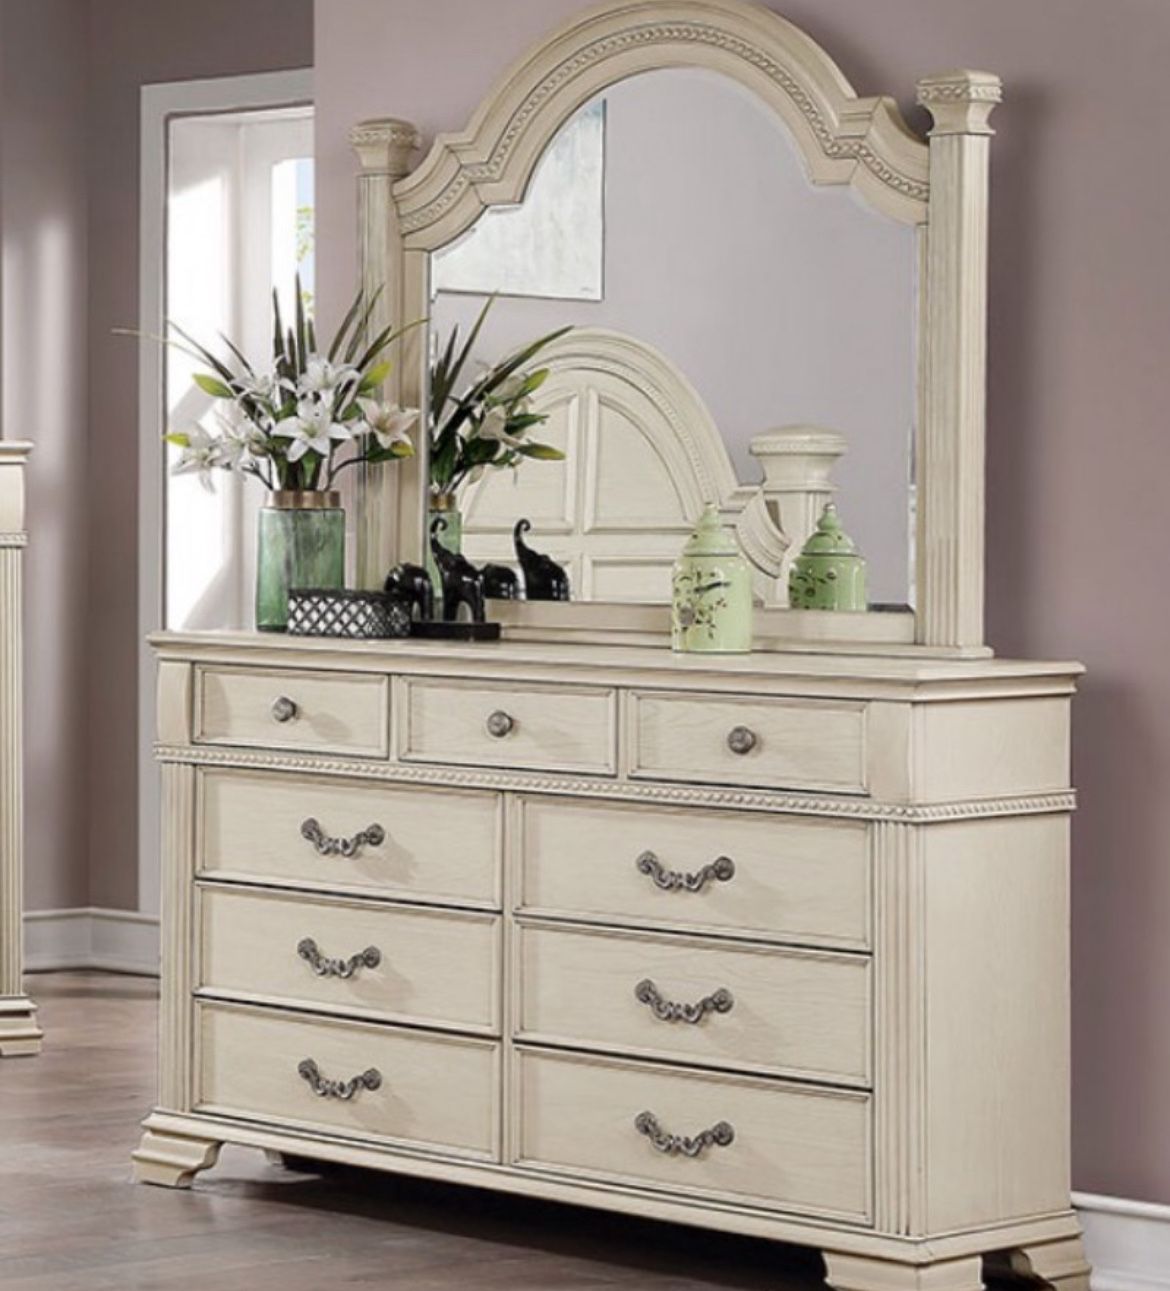 ANTIQUE WHITE DRESSER!!🔥Visit Our Showroom📍Apply Now✅ Delivery Express🚚SPECIAL DEAL🥳🎉